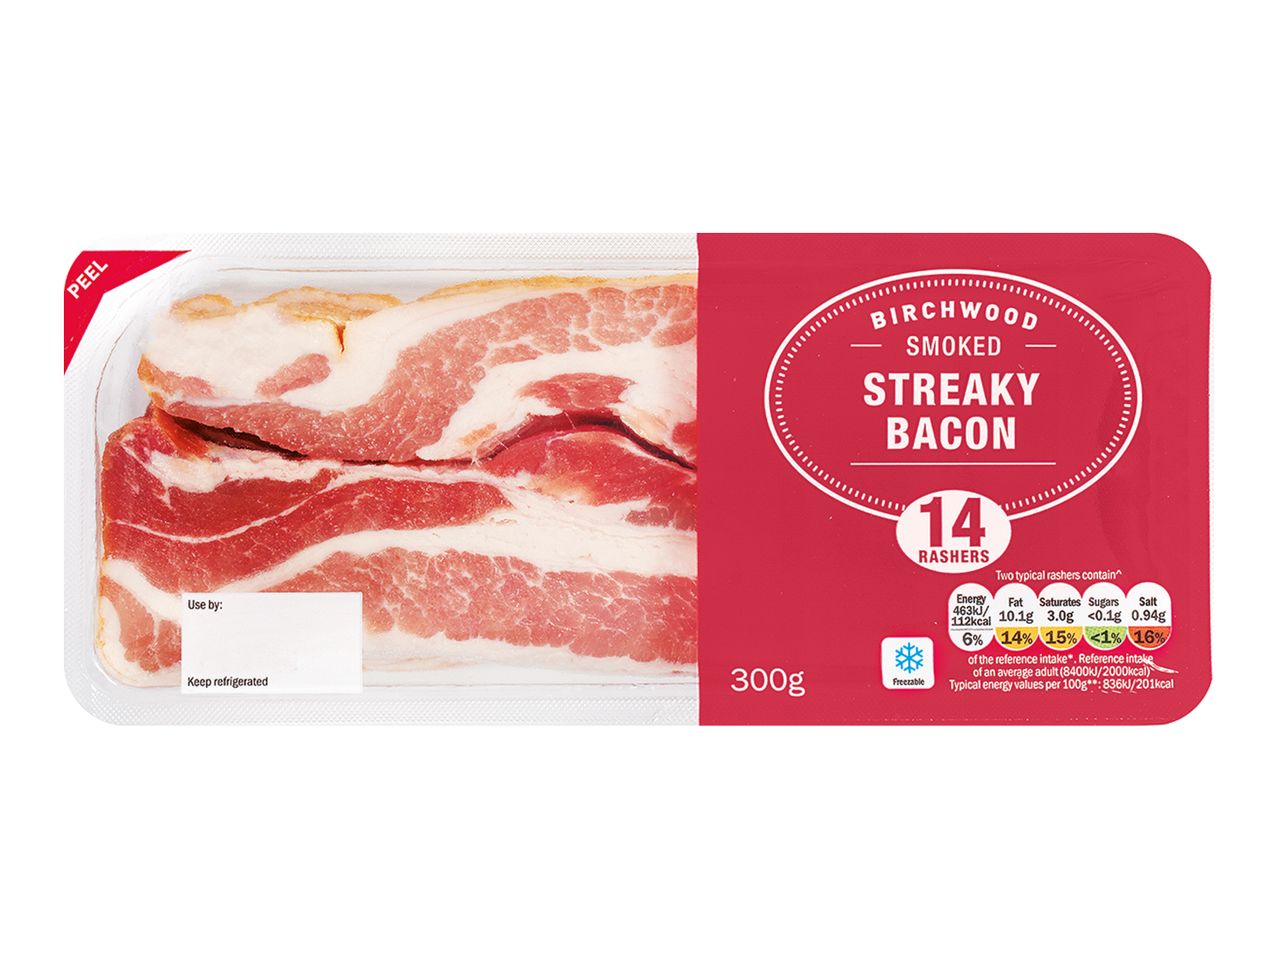 Go to full screen view: Birchwood Streaky Bacon Assorted - Image 2